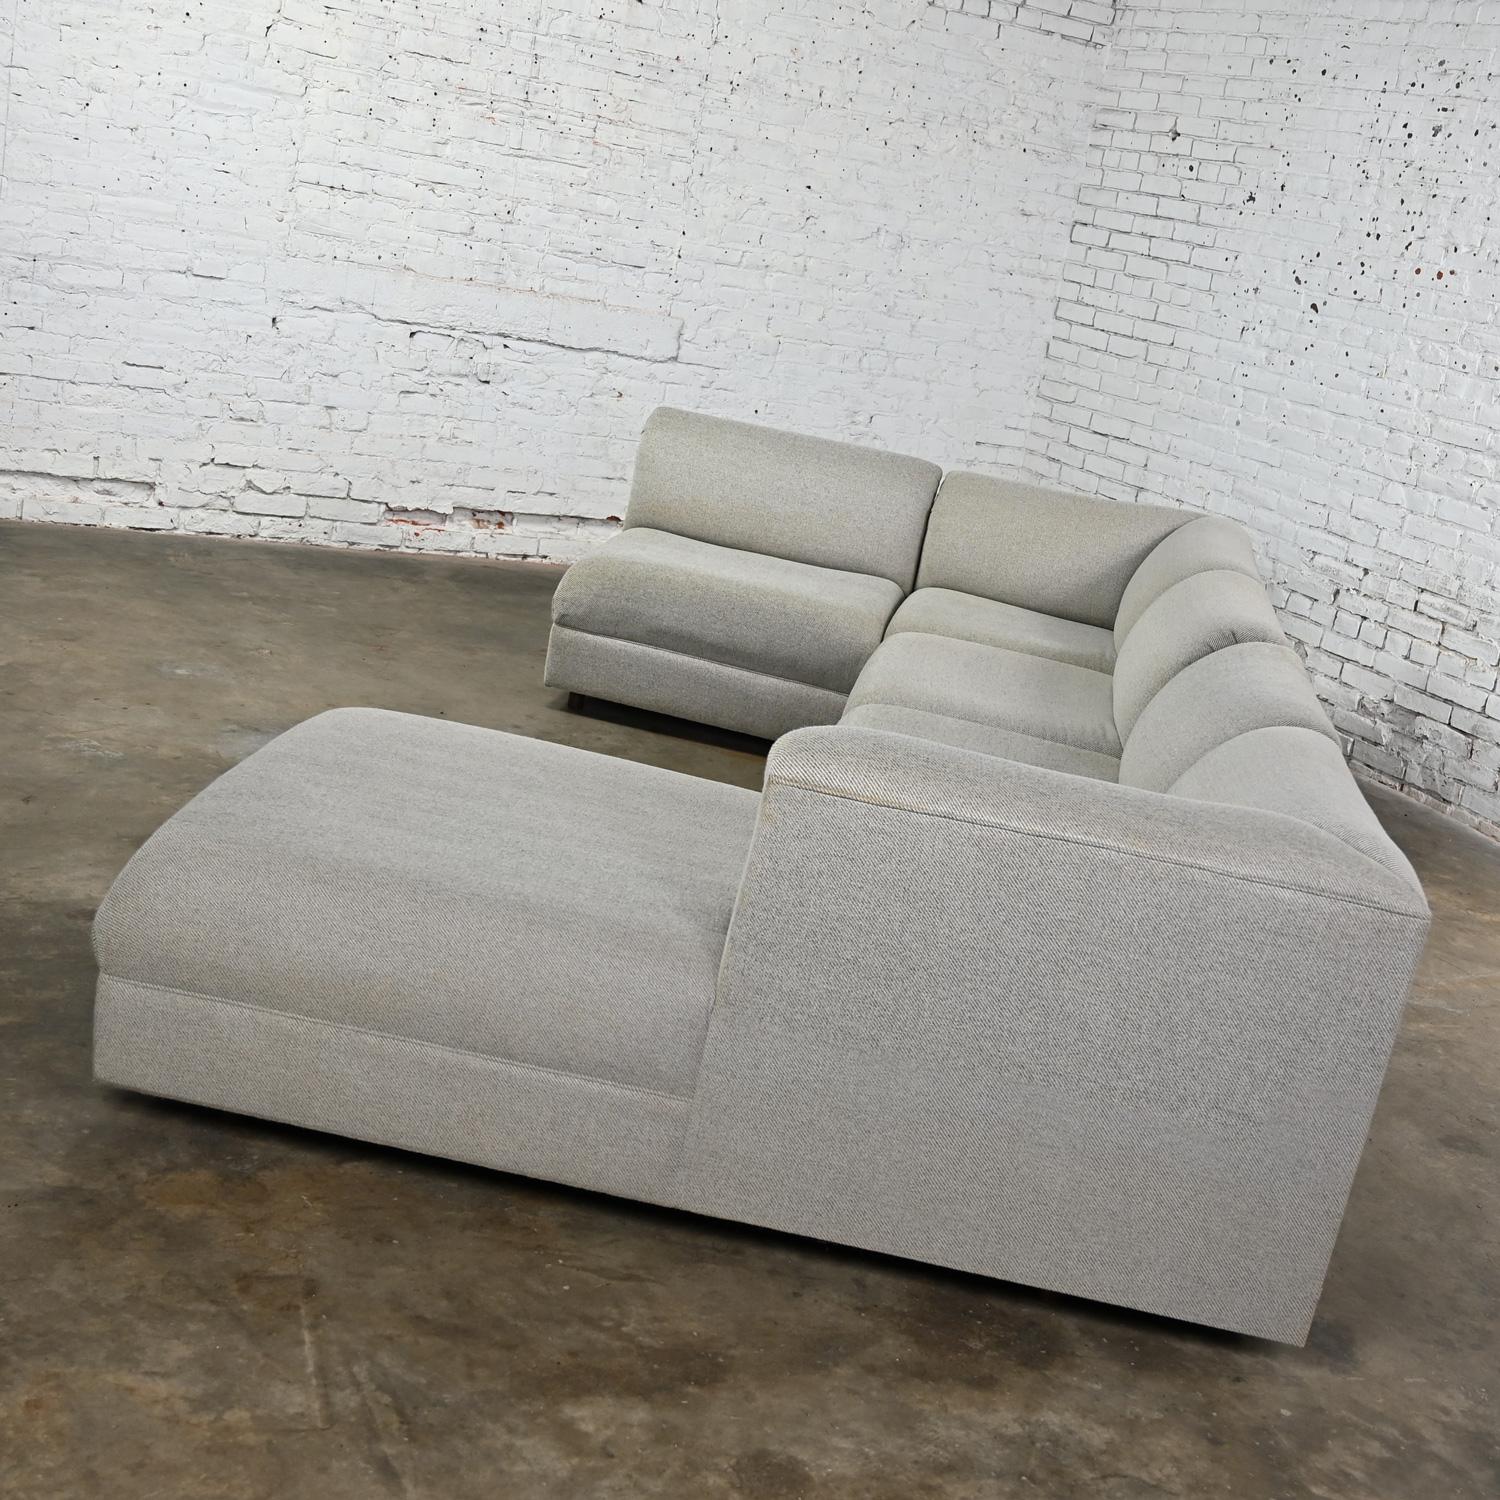 Late 20th Century Modern Modular Sectional Sofa 5 Pieces with Chaise Gray Tweed  For Sale 4